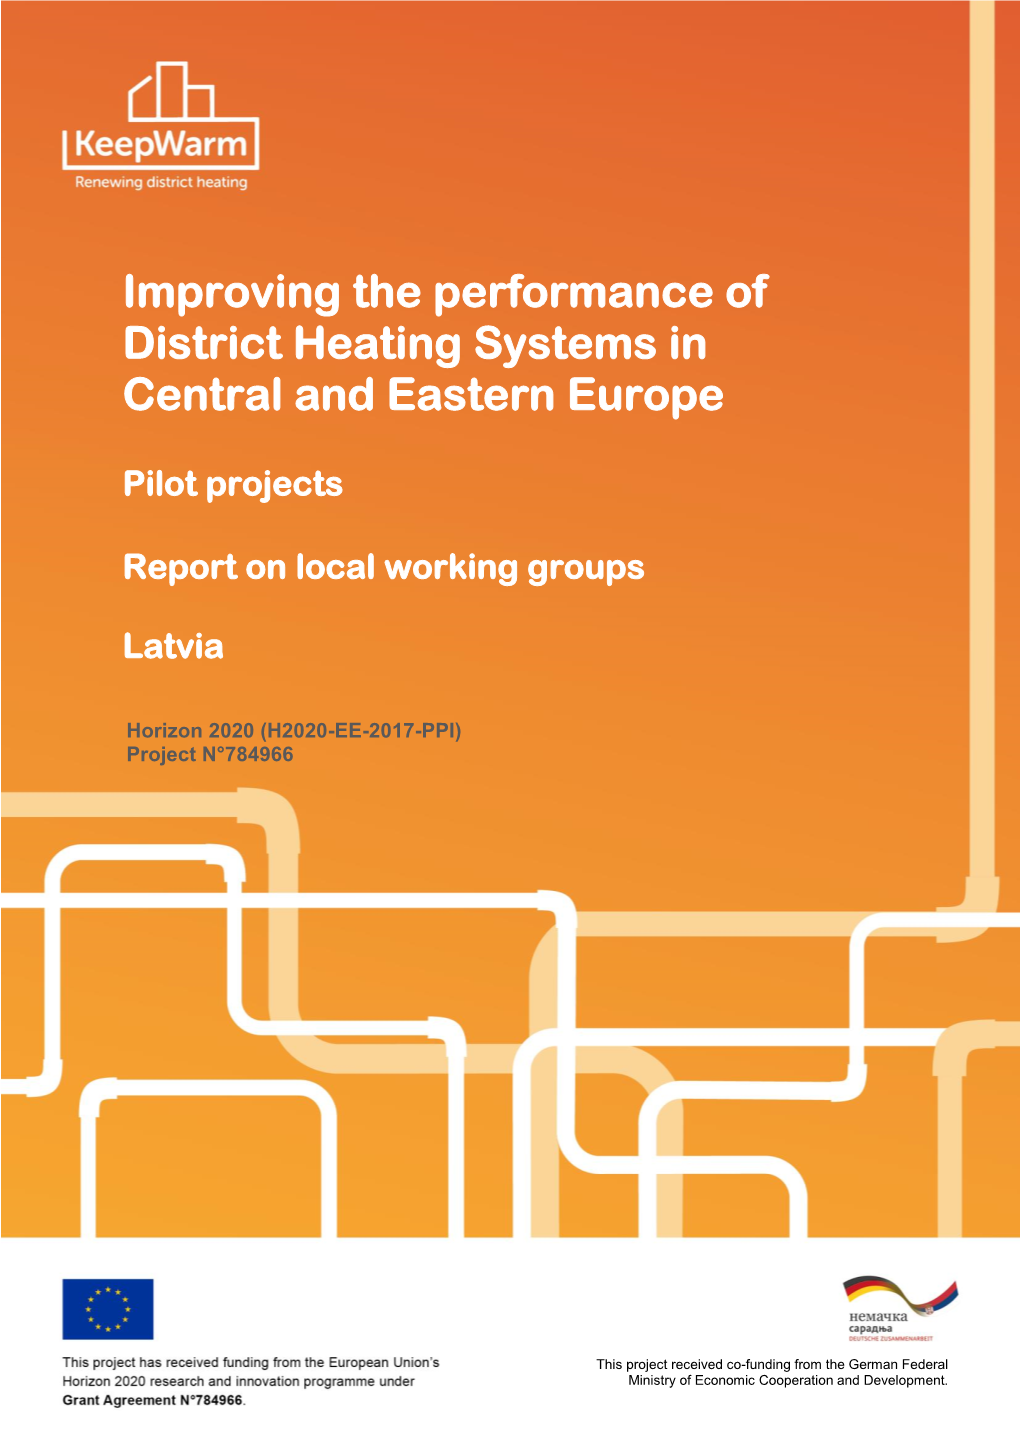 Improving the Performance of District Heating Systems in Central and Eastern Europe